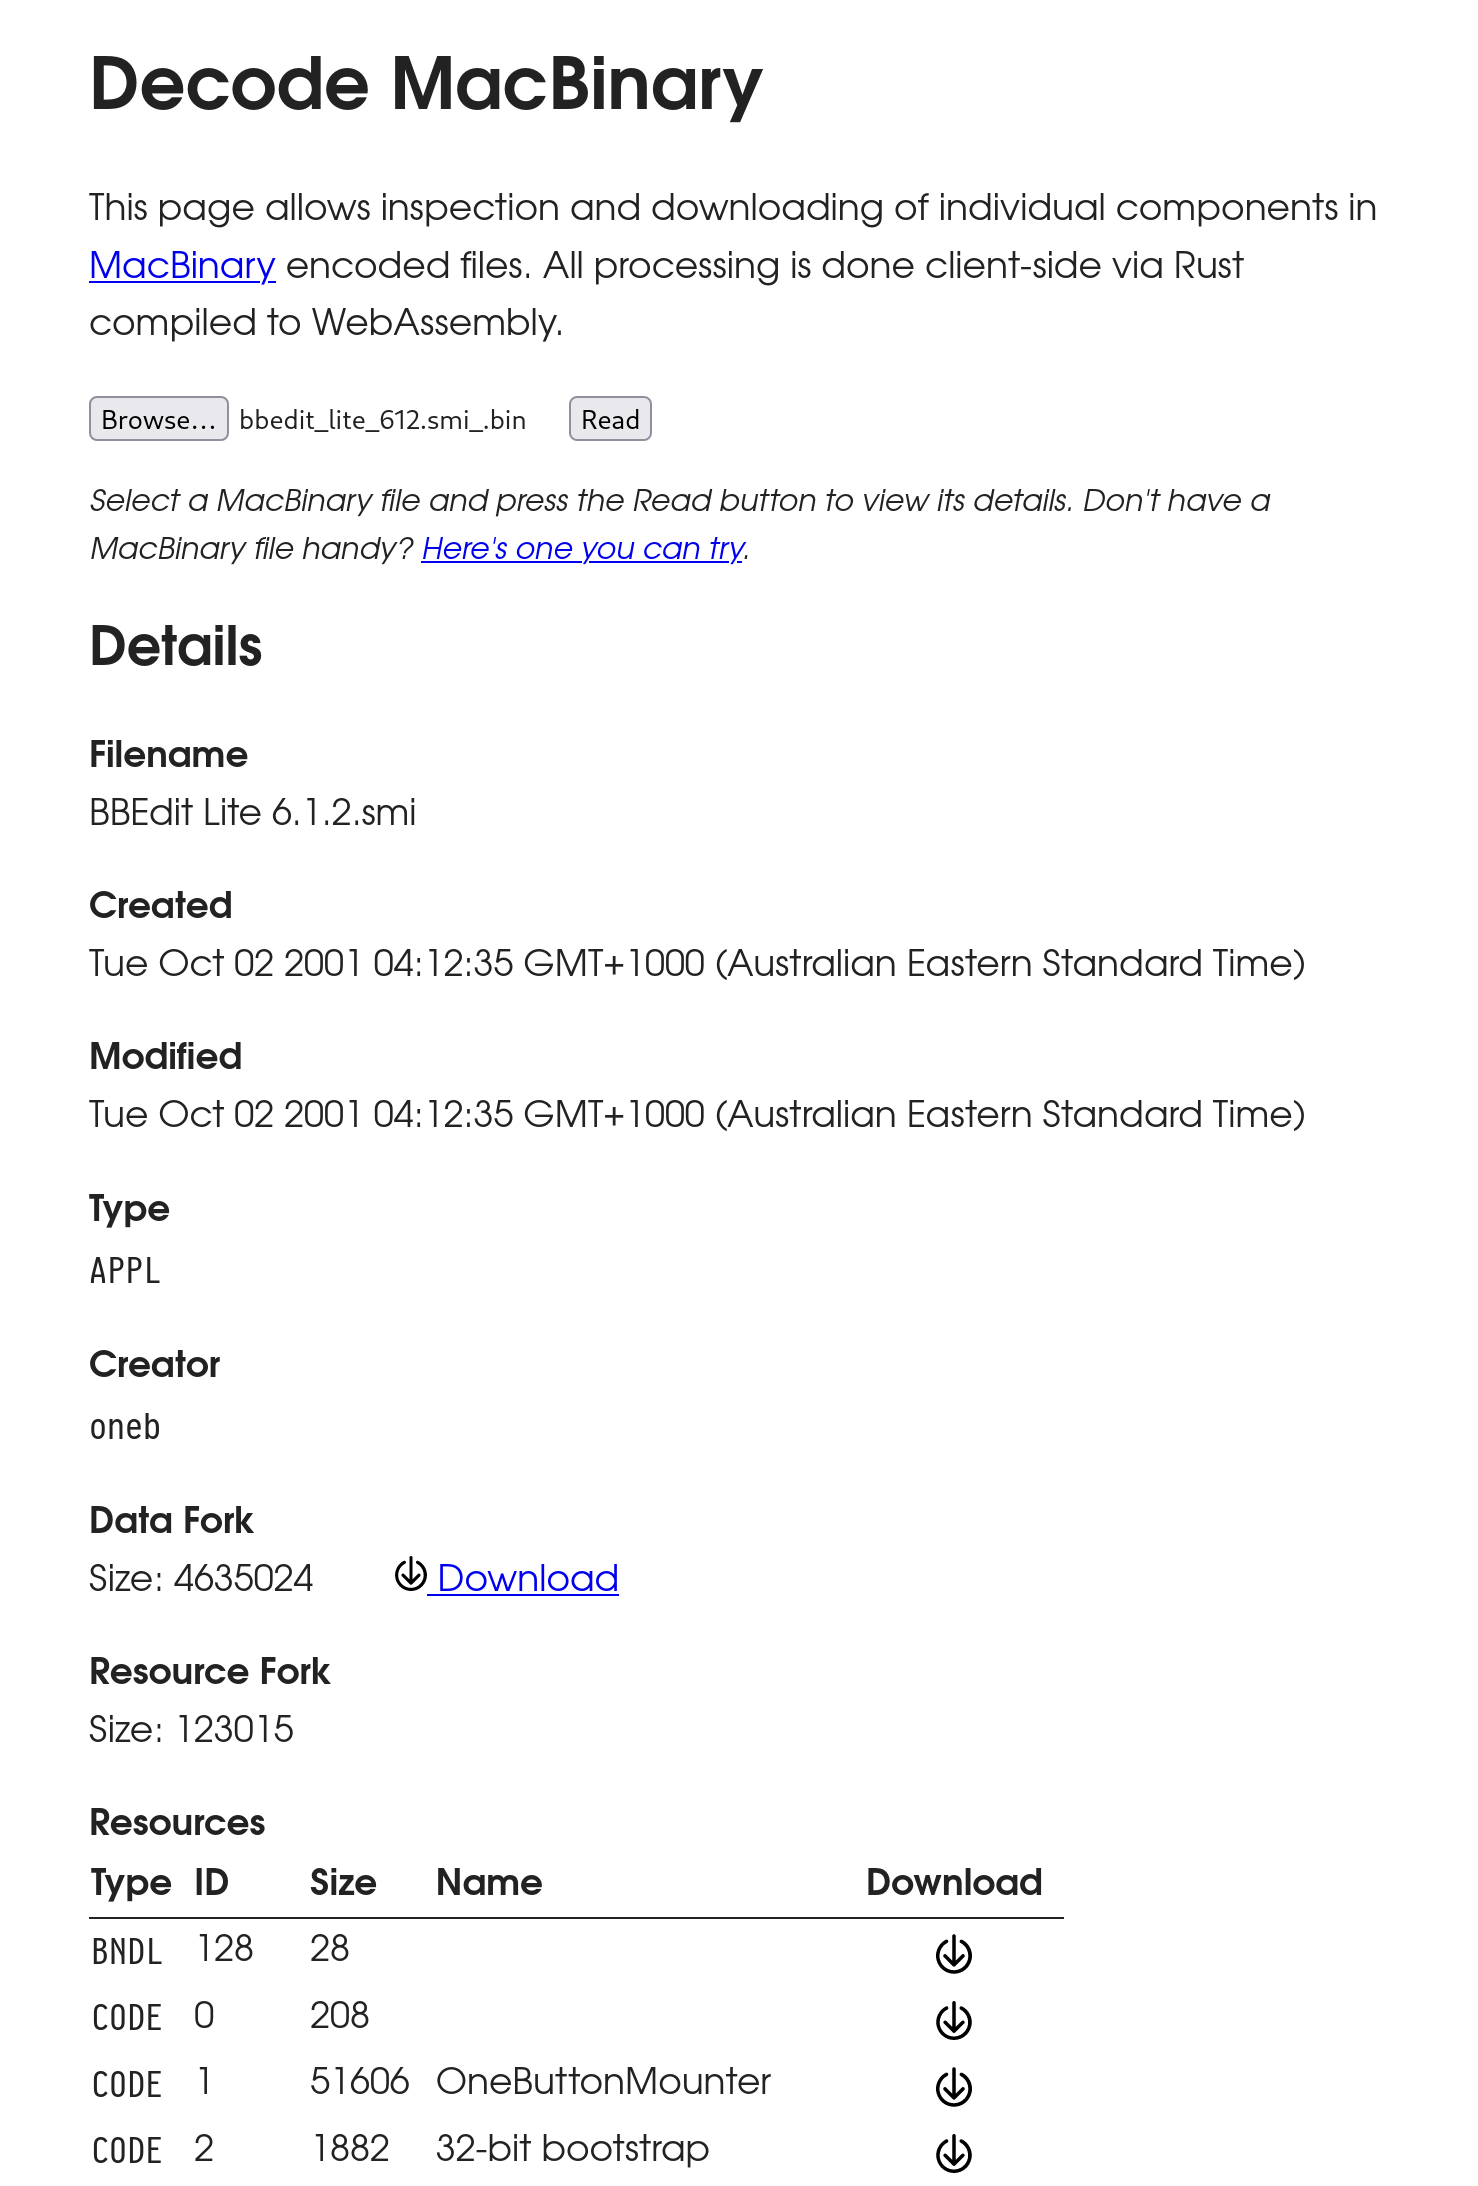 Screenshot of the MacBinary webpage. It is showing the parsed information from a file called 'bbedit_lite_612.smi_.bin'. Several resources are lists such as 'BNDL', and 'CODE'.